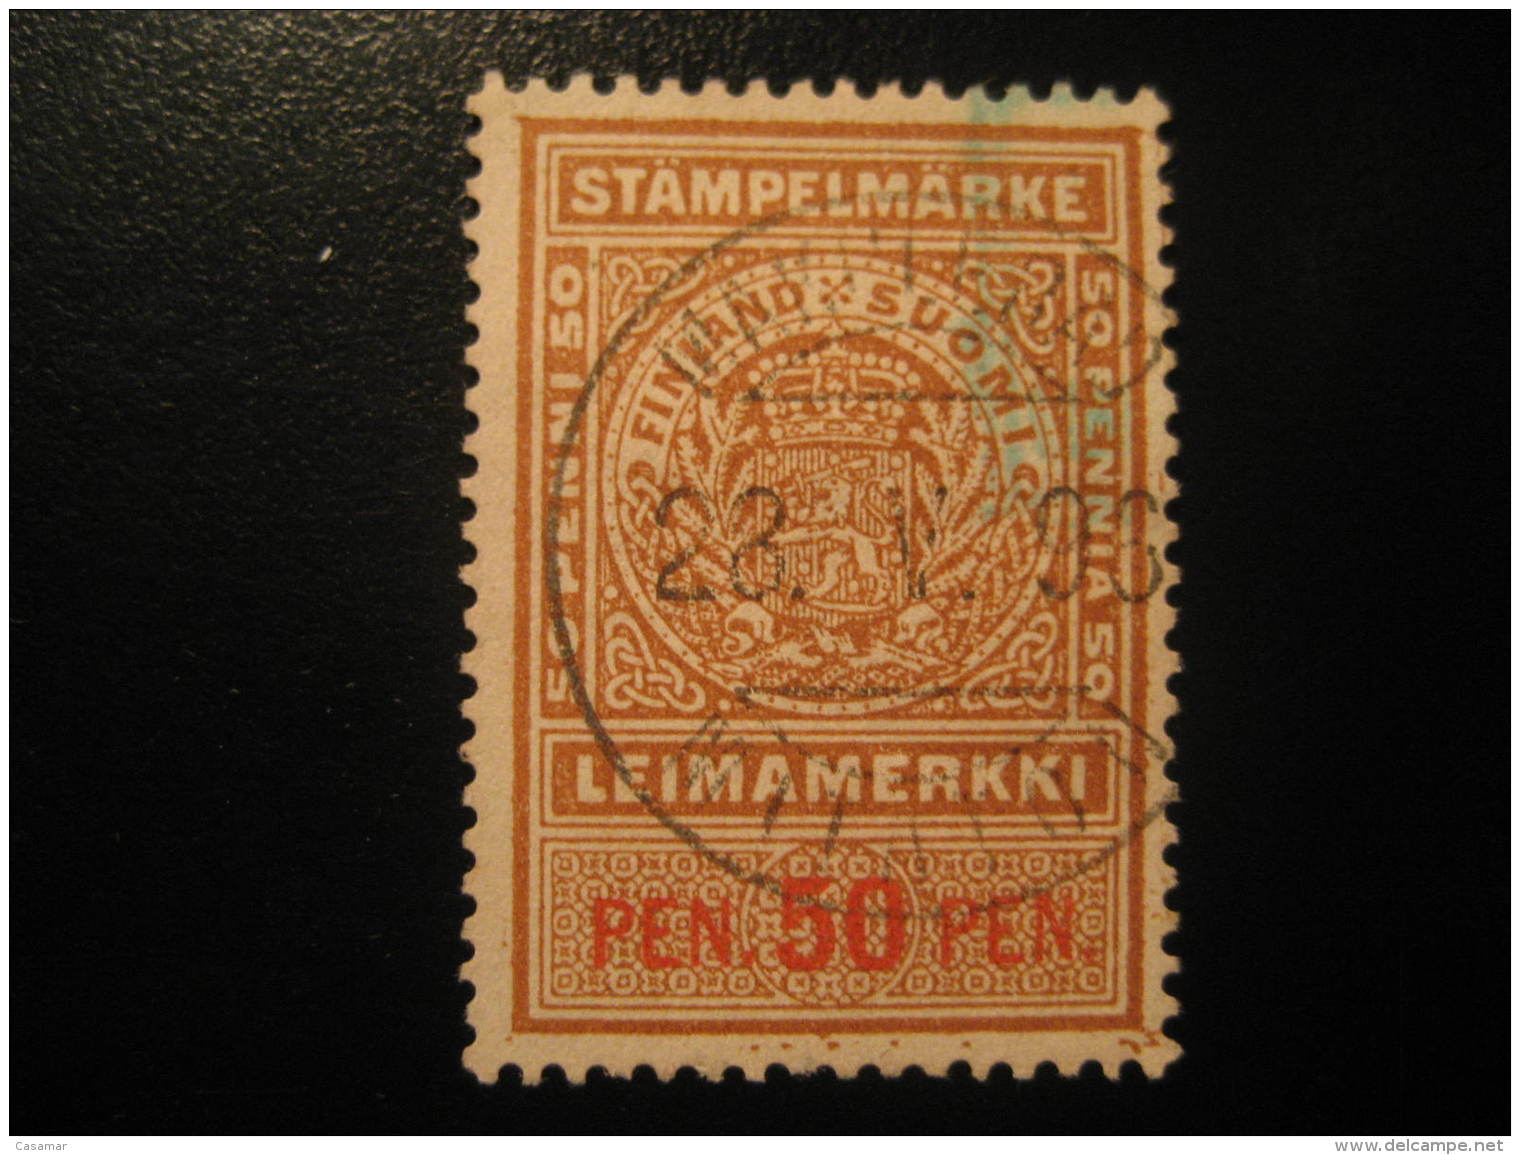 1896 STAMPELMARKE 50 Pen Revenue Fiscal Tax Postage Due Official FINLAND - Fiscale Zegels